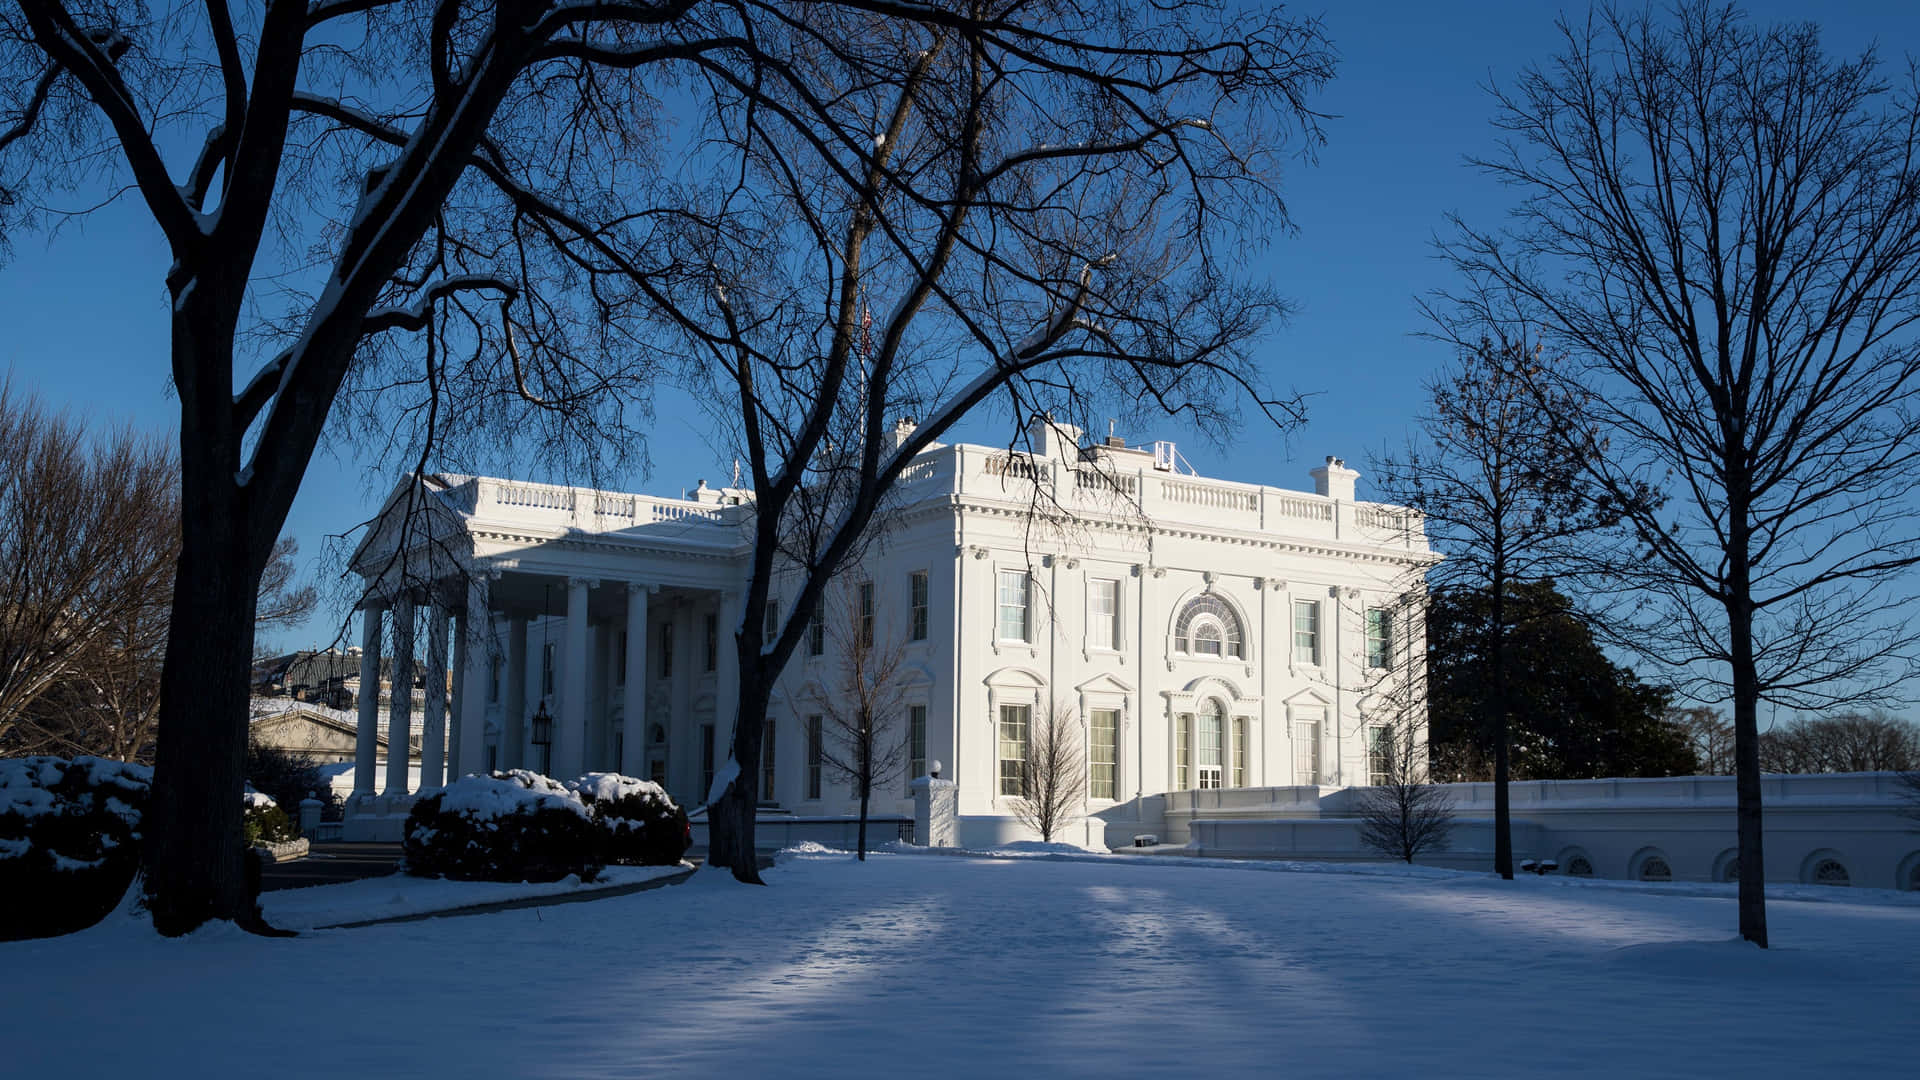 The White House at the National Mall